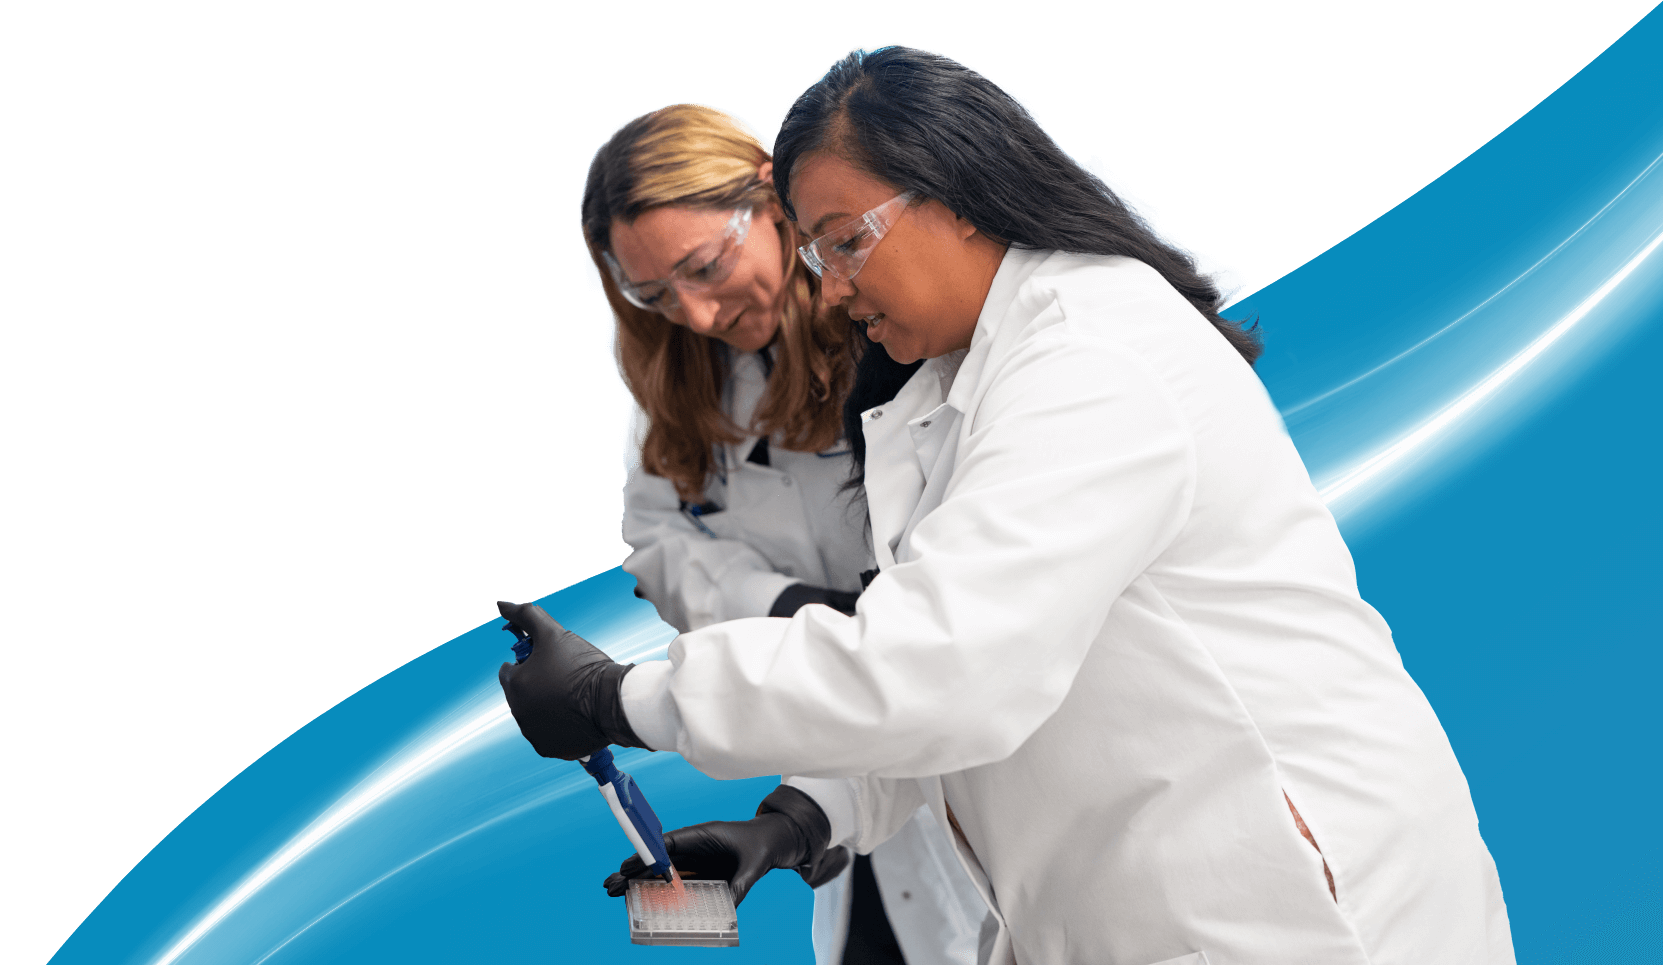 A cut-out image of two scientists wearing goggles, white lab coats, and black gloves. One scientist is pipetting liquid into a tray while the other looks on. They are superimposed on a light blue wave background with a bright light trail.